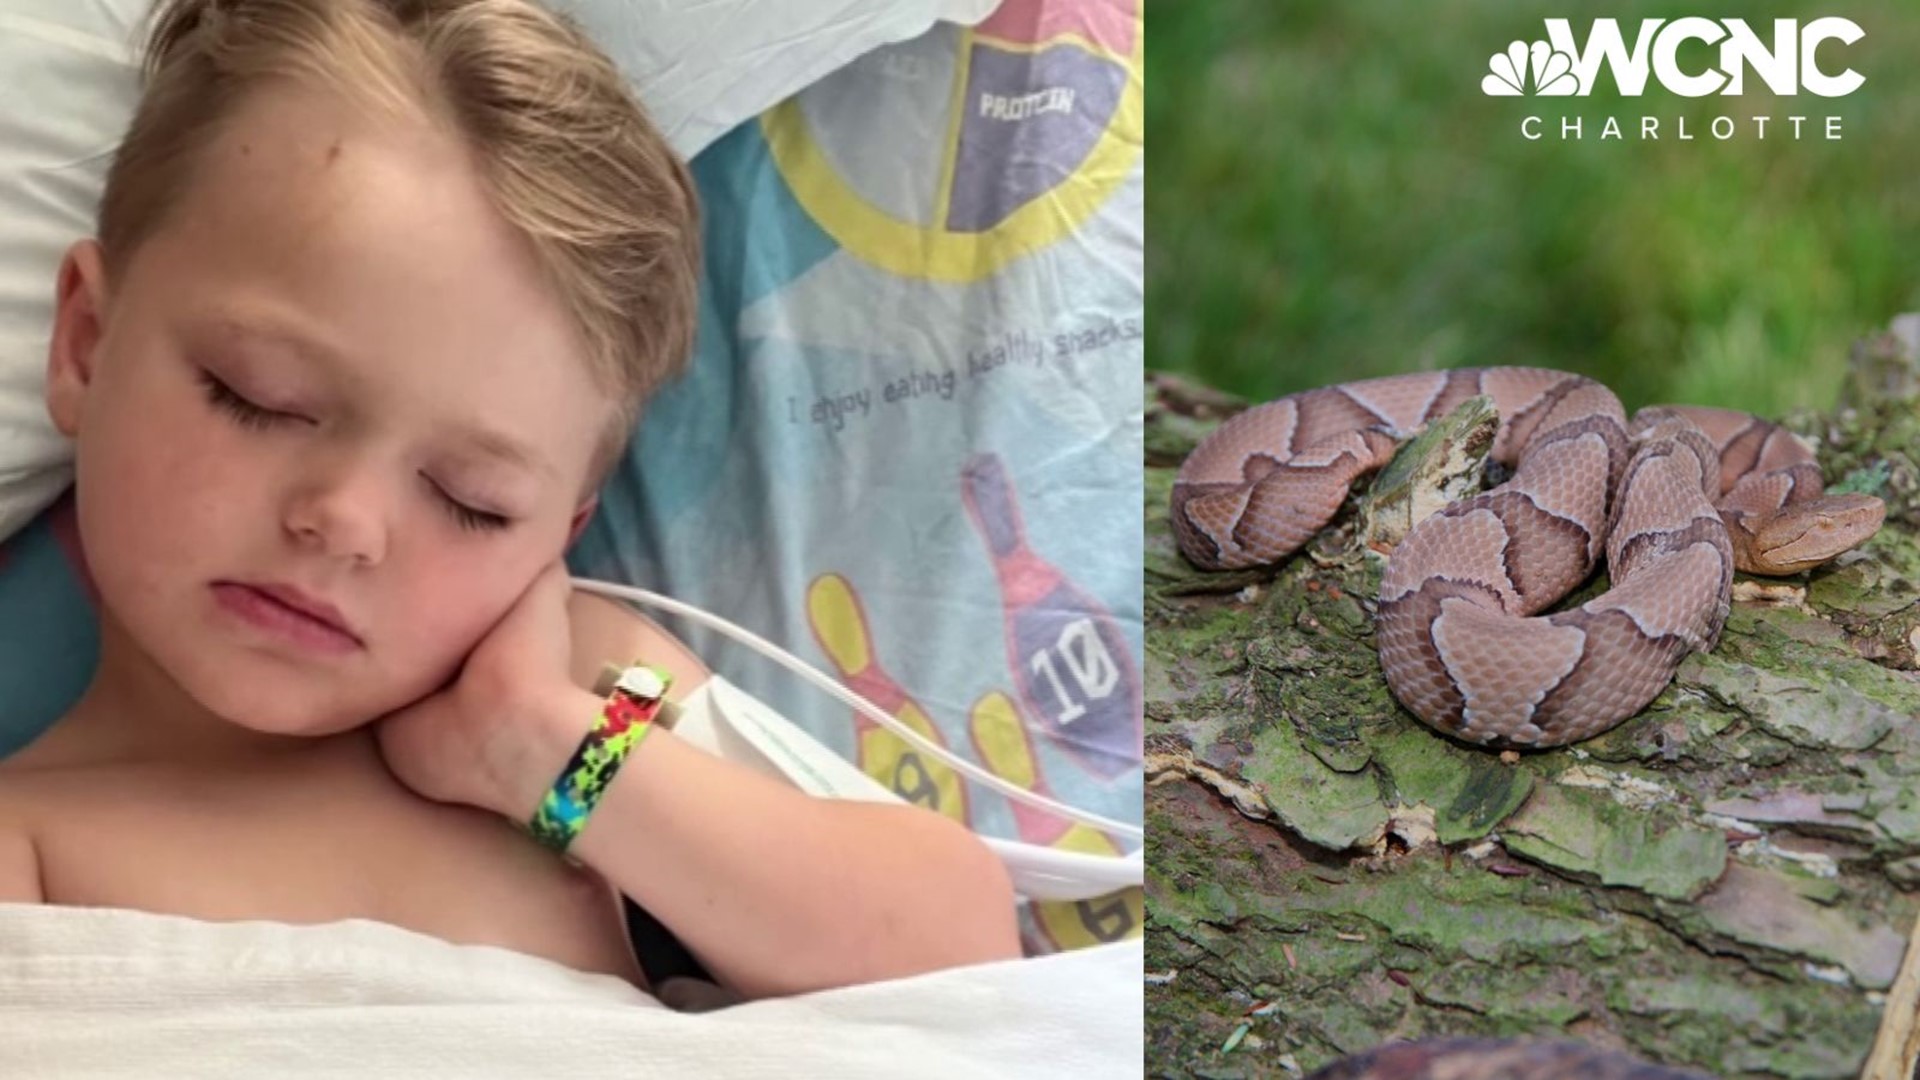 A 4-year-old boy was bit by a copperhead while his family was on vacation in the North Carolina mountains. Doctors say the family's quick actions saved his life.